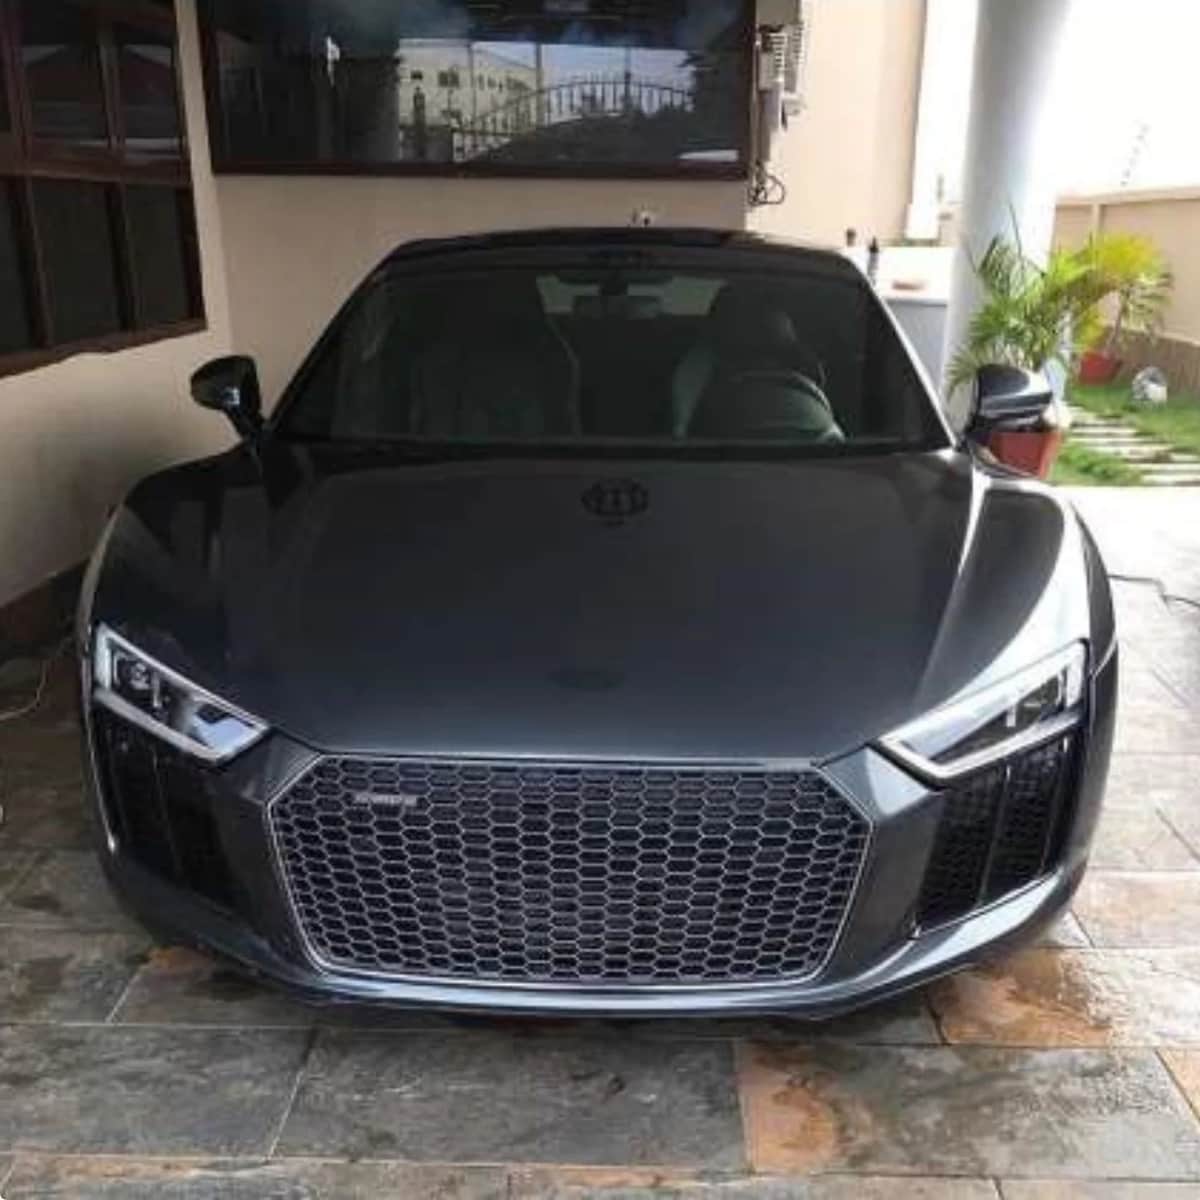 Photos of the multi-million Dollar car collection owned by a 31-year old Ghanaian